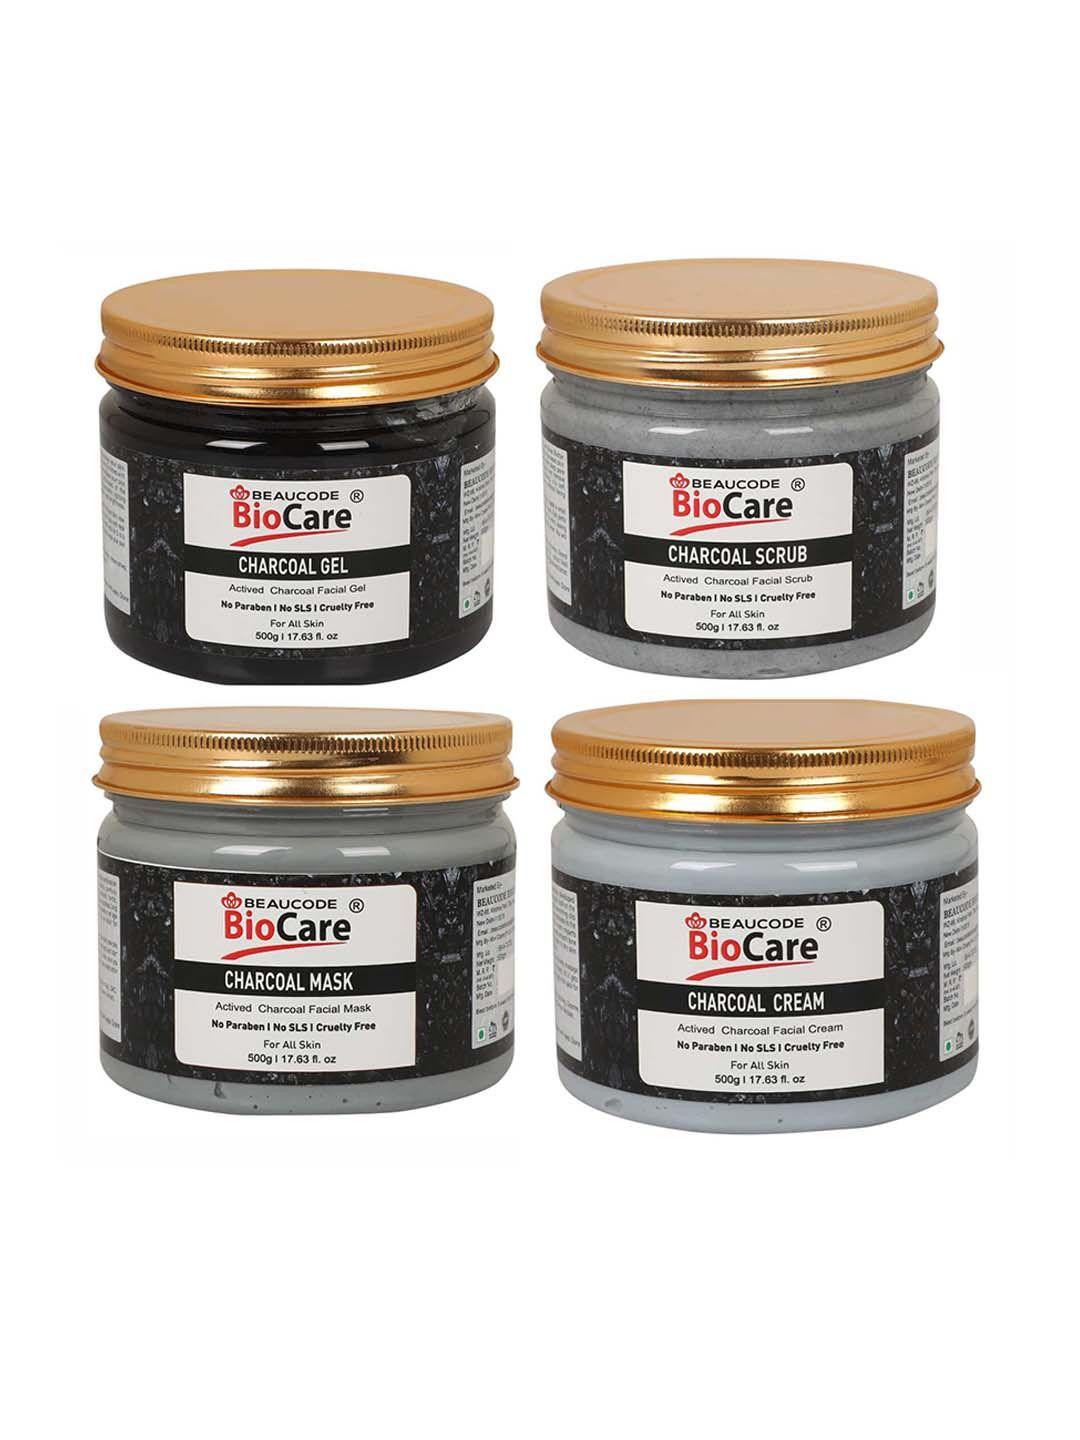 beaucode biocare activated charcoal facial kit for all skin types - 2000g